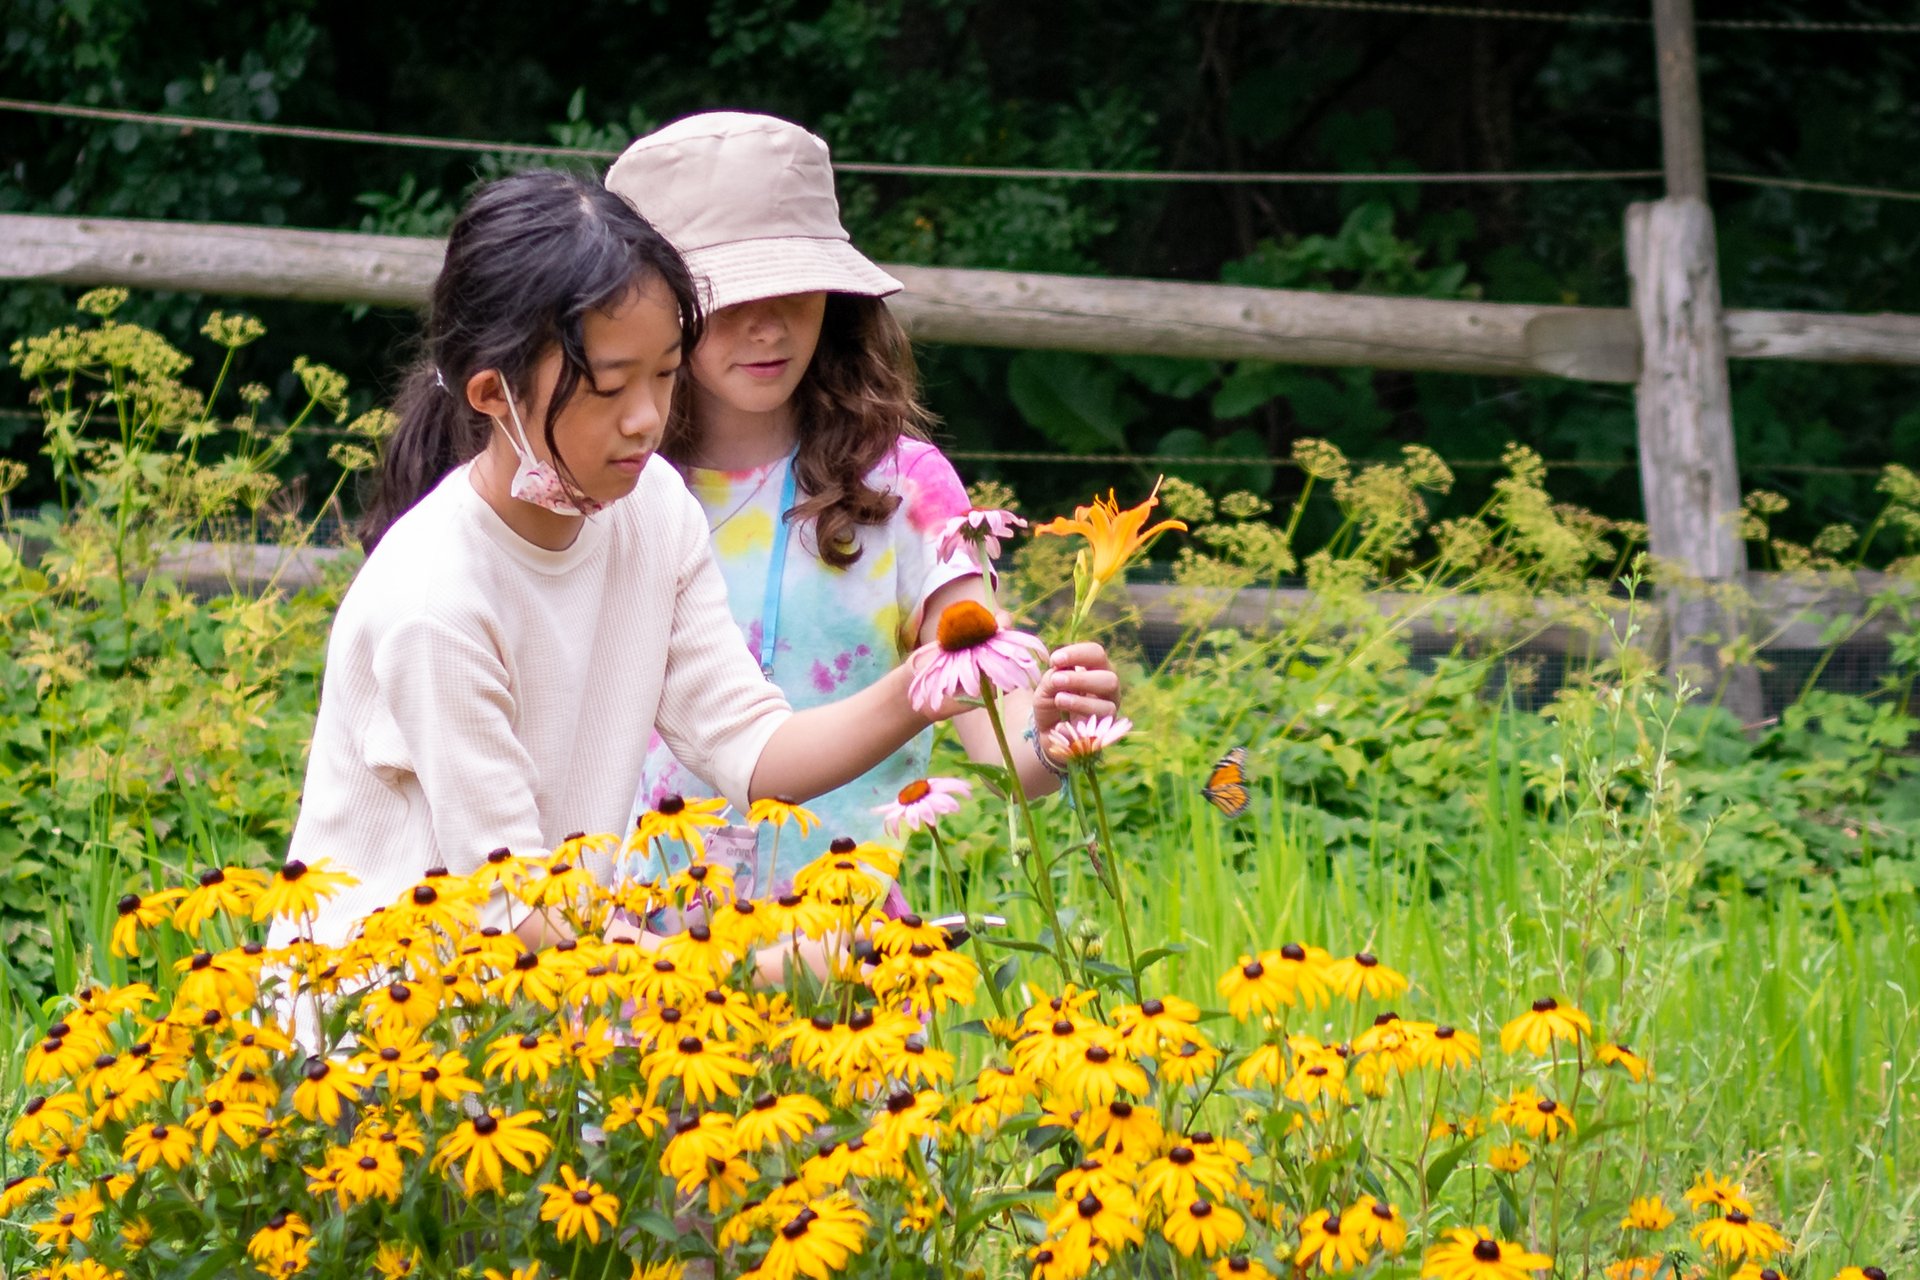 Two young girls, one with a pink hat and the other with a black ponytail, picking yellow and pink flowers.